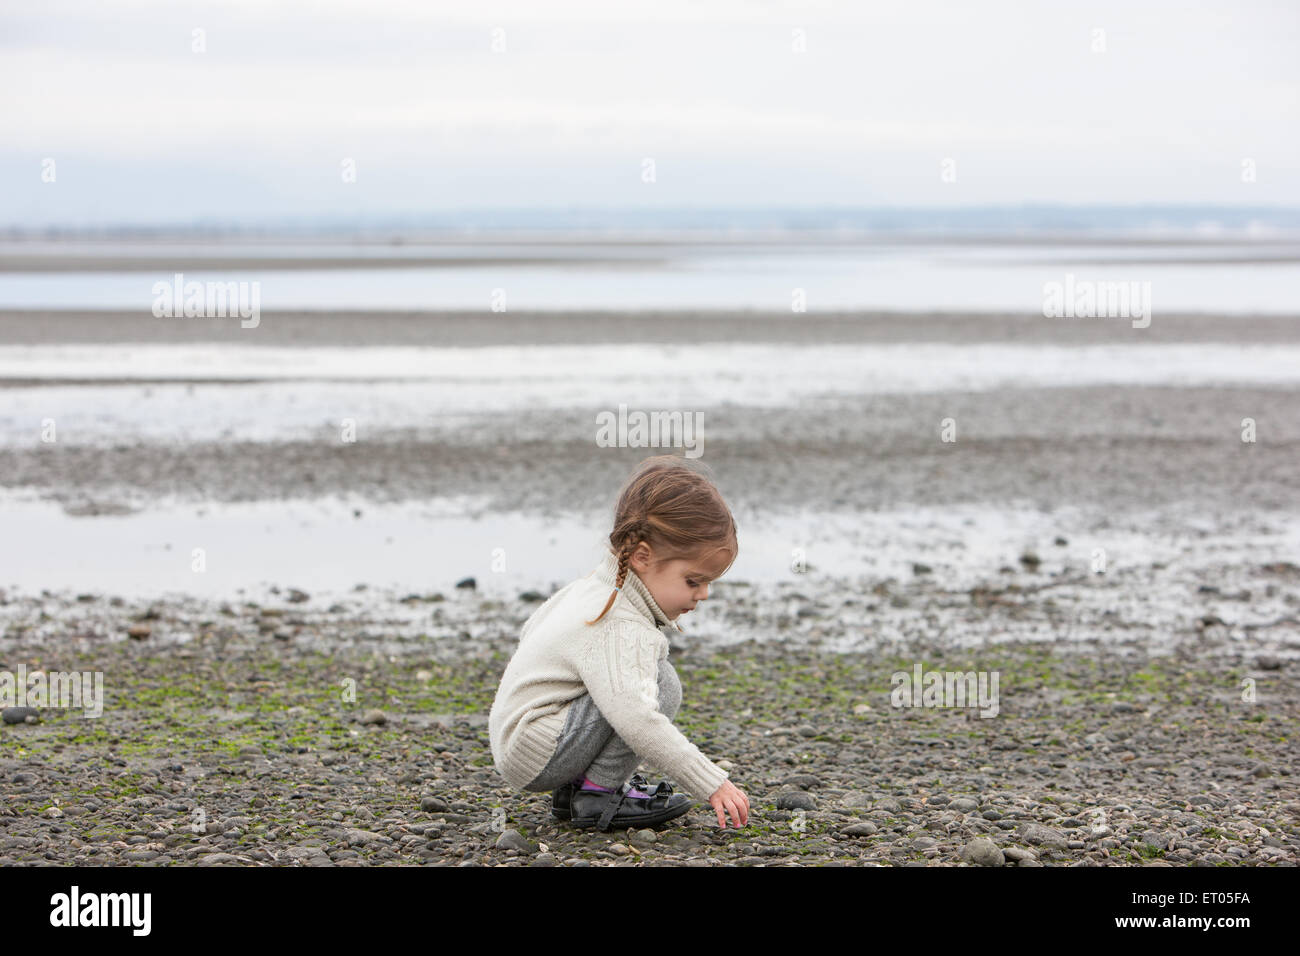 Girl picking up pebbles on beach Stock Photo